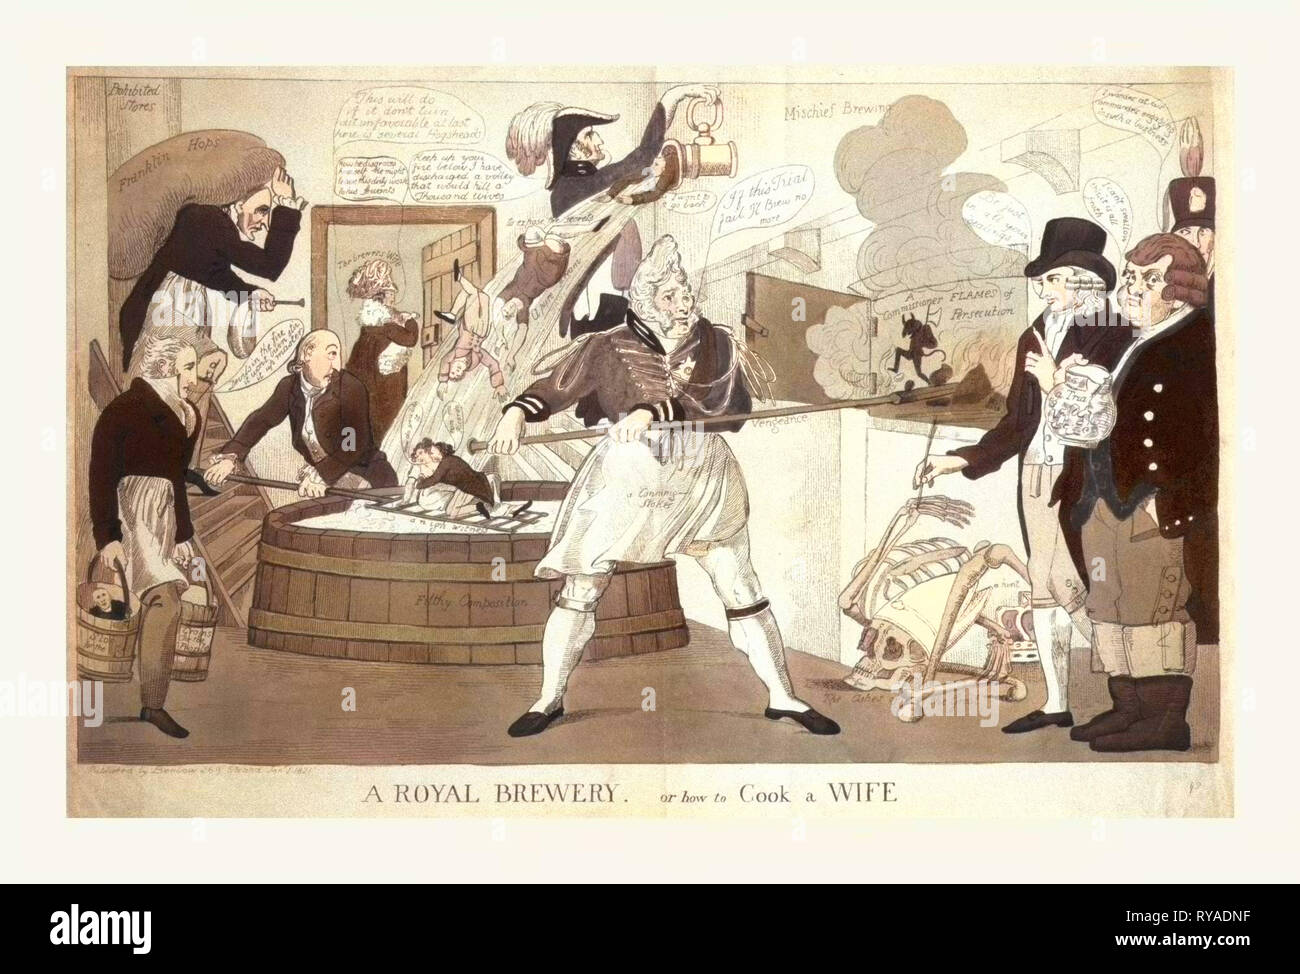 A Royal Brewery, or How to Cook a Wife, Engraving 1821, George IV, a Conning Stoker, of Some Mischief Brewing, Stirring Up the Flames of Persecution, with Vengeance, Saying, If This Trial Fail I'L Brew No More. Behind Him is a Vat Filthy Composition Into which Flows a Pure Stream to Expose the Secrets which Spills on a Couple in an Embrace, How Do You Like It - Non Mi Ricordo. Passing an Open Door is Caroline, the Brewers Wife. On the Right Are Three Men, One Says, Be Just in All Your Dealings. Another, Holding a Pitcher Labeled a Trial Says, I Can'T Swallow This, It is All Froth. Stock Photo